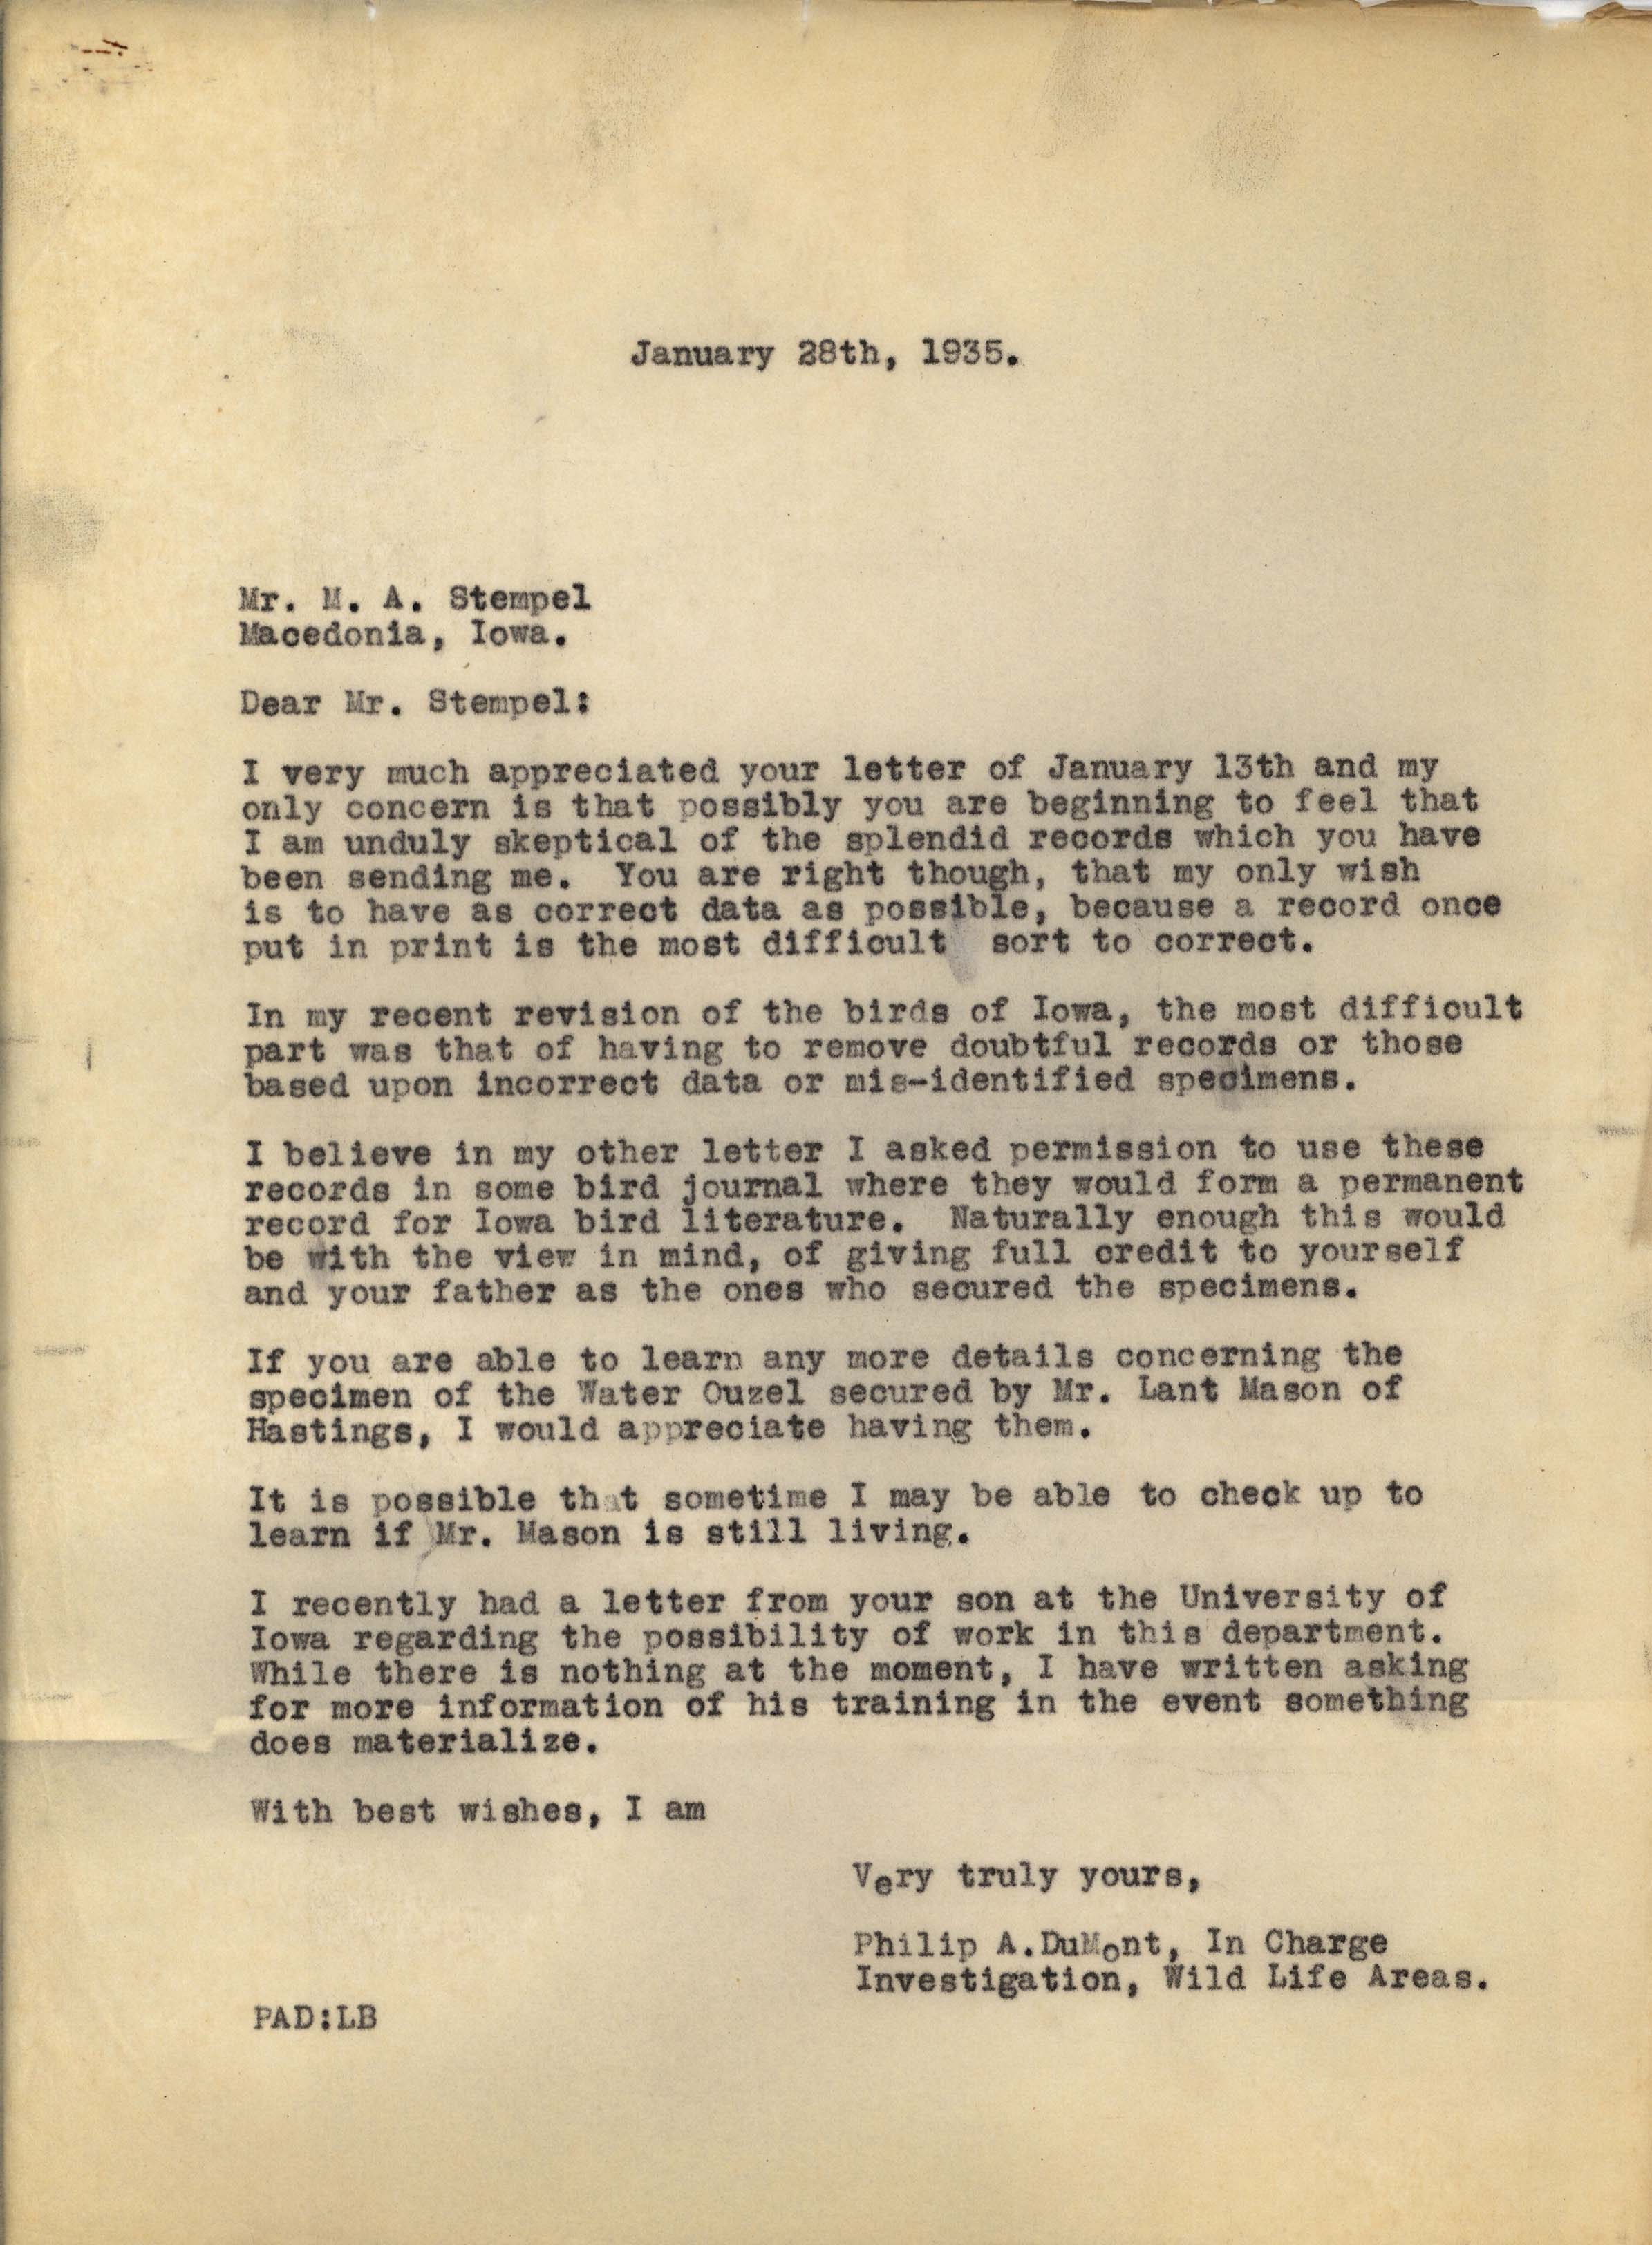 Philip DuMont letter to Max Stempel regarding details about the Water Ouzel, January 28, 1935